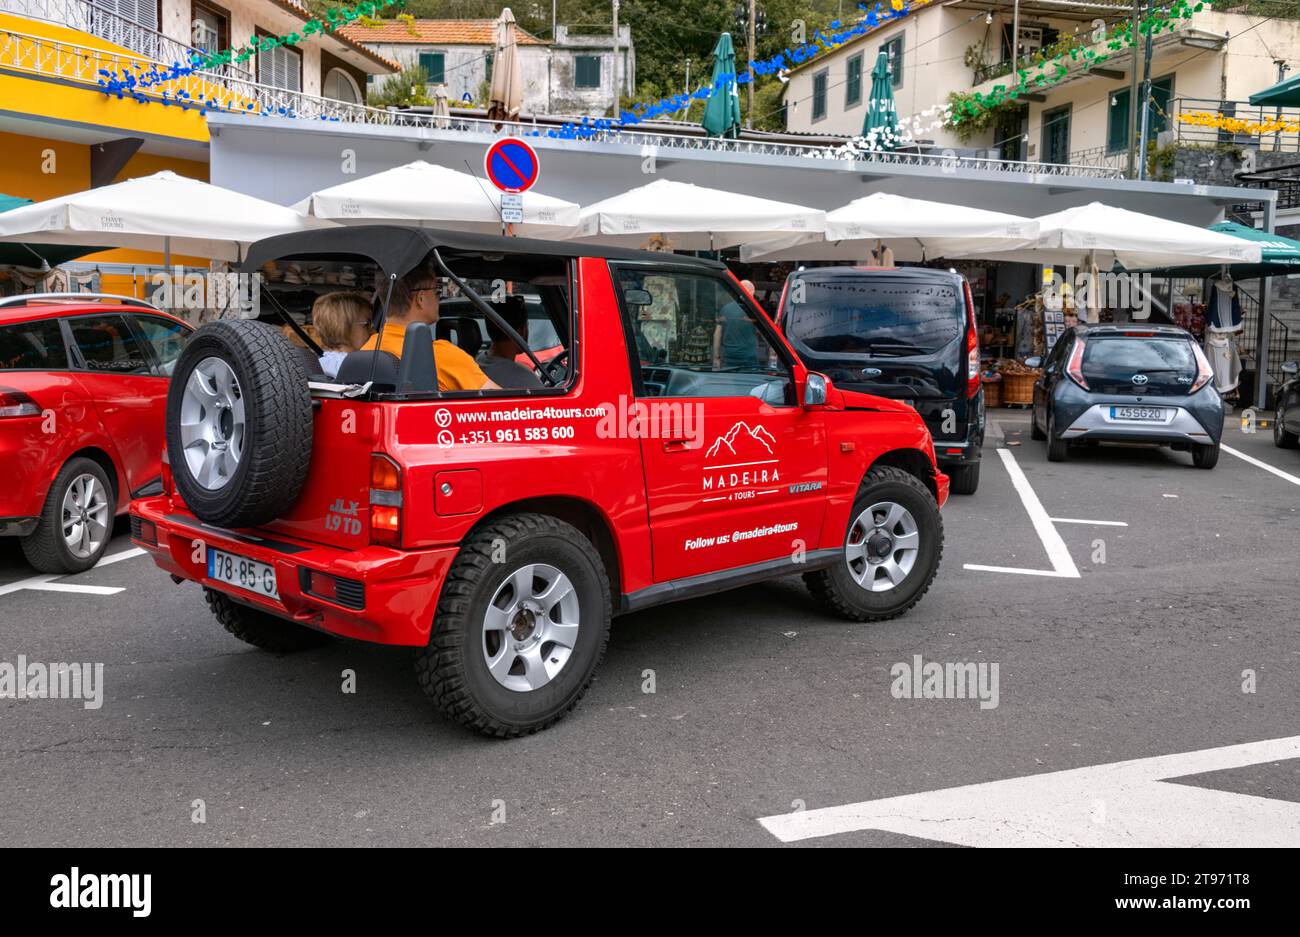 Red Suzuki tourist jeep with tourists in the village of Curral das Freiras, Madeira, Funchal Portugal Stock Photo